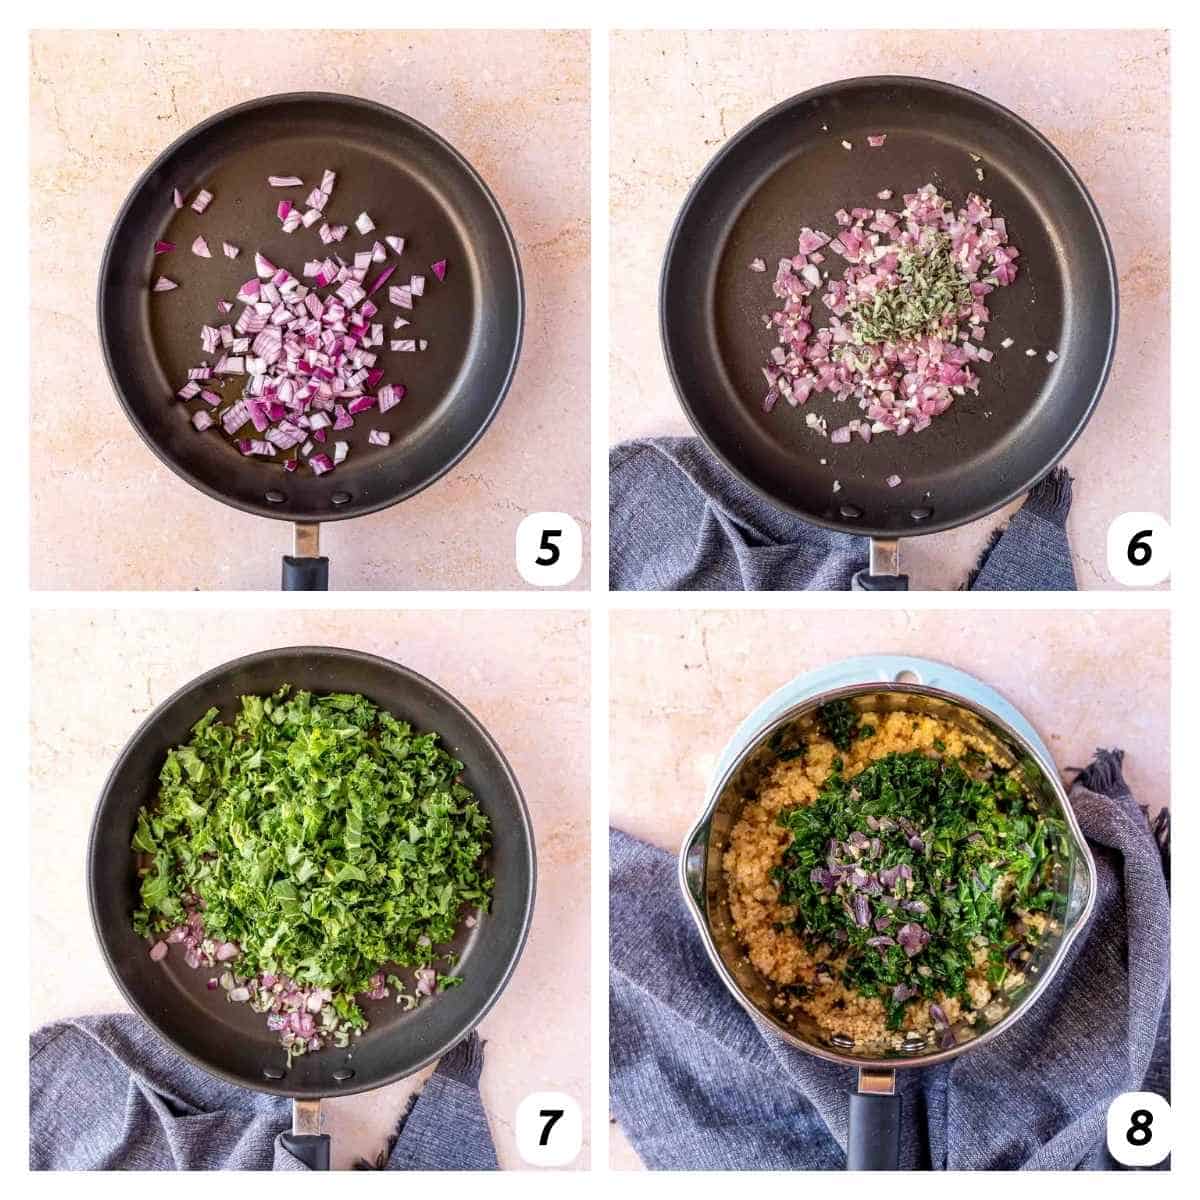 Four panel grid of process shots 5-8 - gradually adding ingredients into a saucepan to create the quinoa filling.